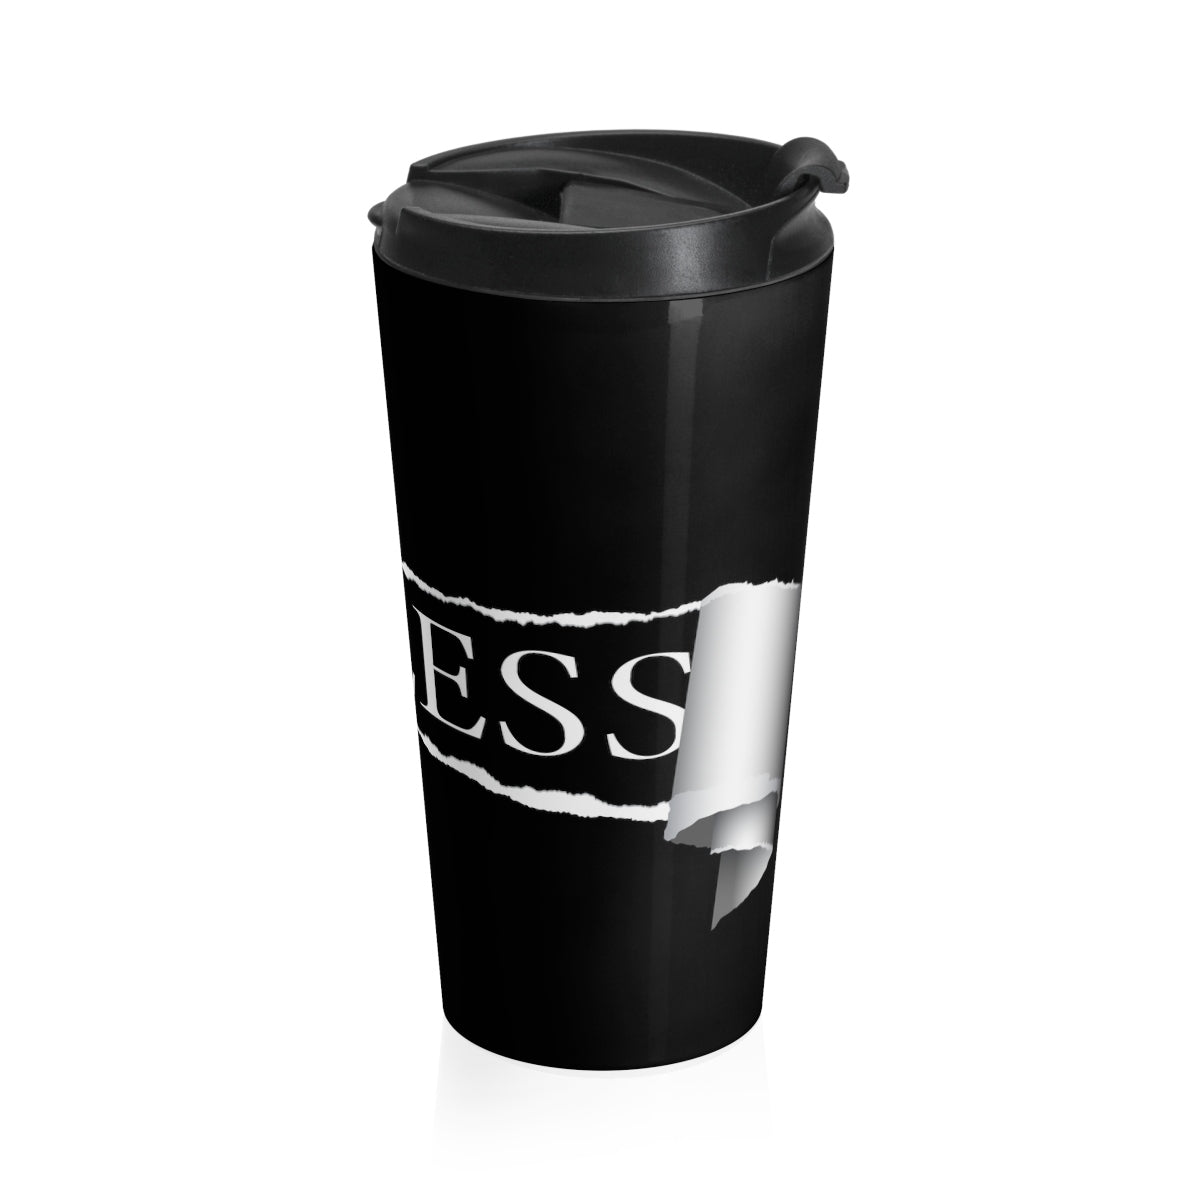 Fearless Ripped/Stainless Steel Travel Mug